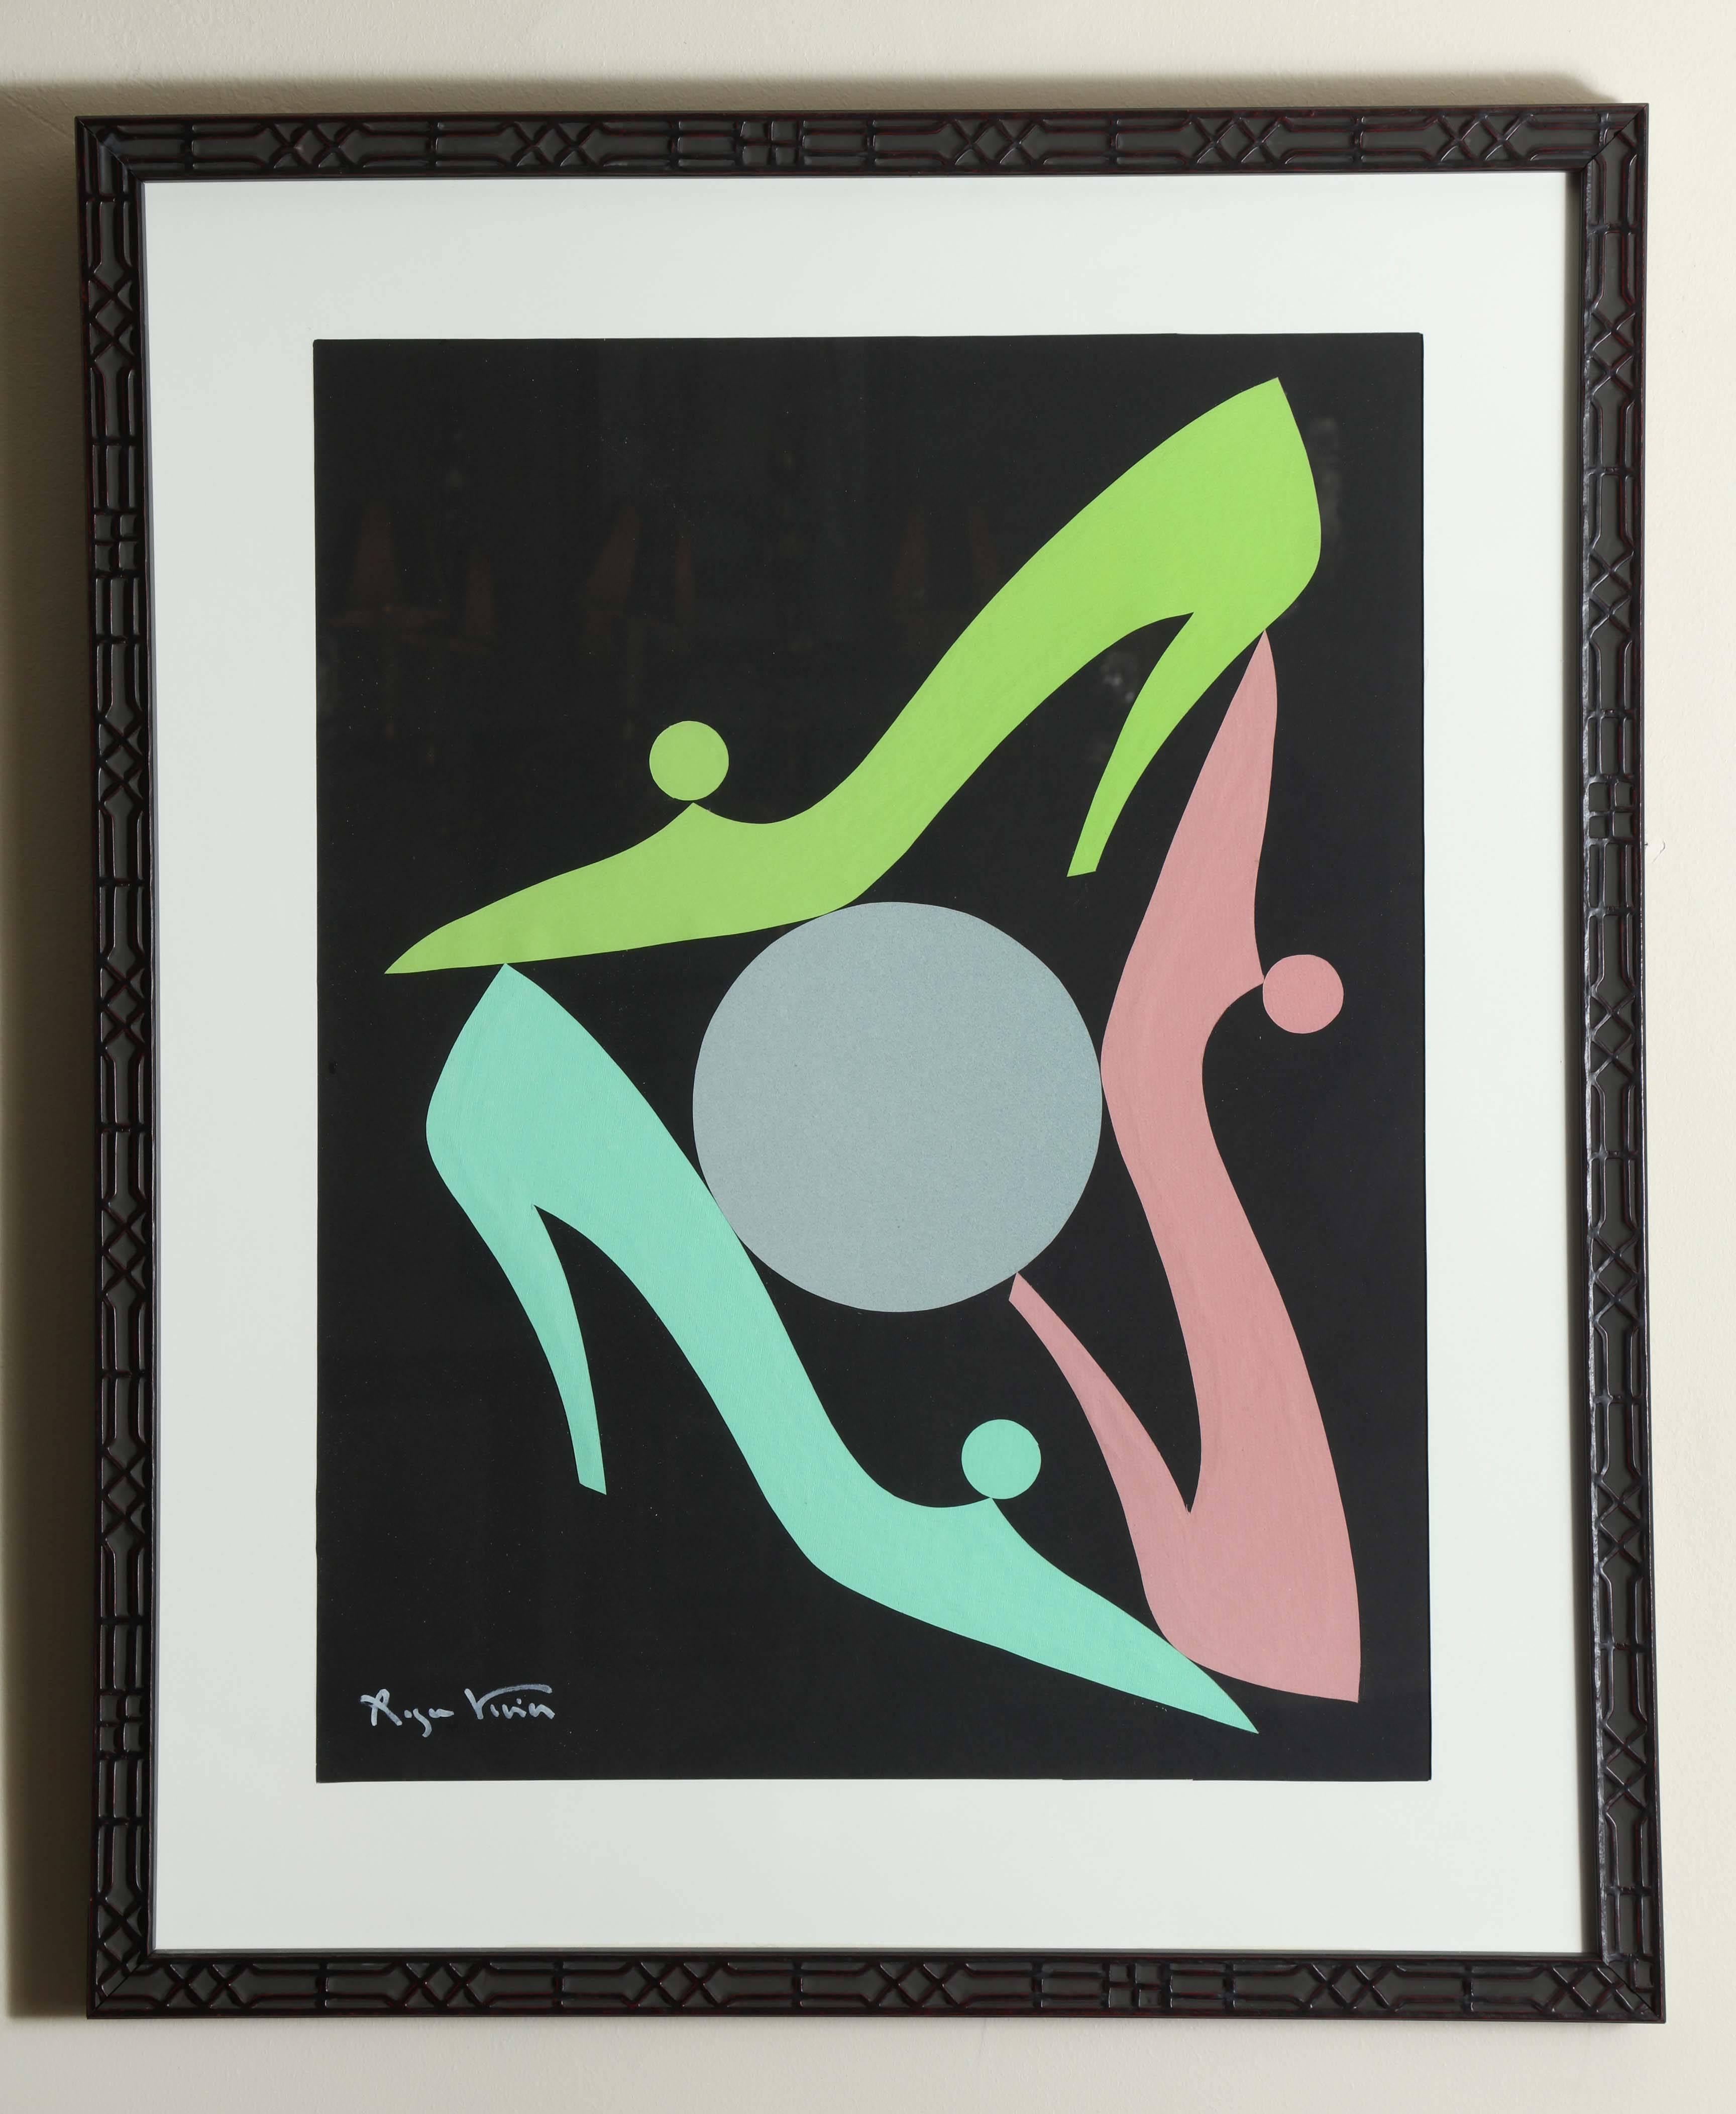 Colored construction paper cut-outs inspired by Matisse of stiletto heels in rose, apple green, and pea green encircling a grey circle on a black ground by the acclaimed shoe designer Roger Vivier (French, 1913-1998). Mounted by artist on cardboard.